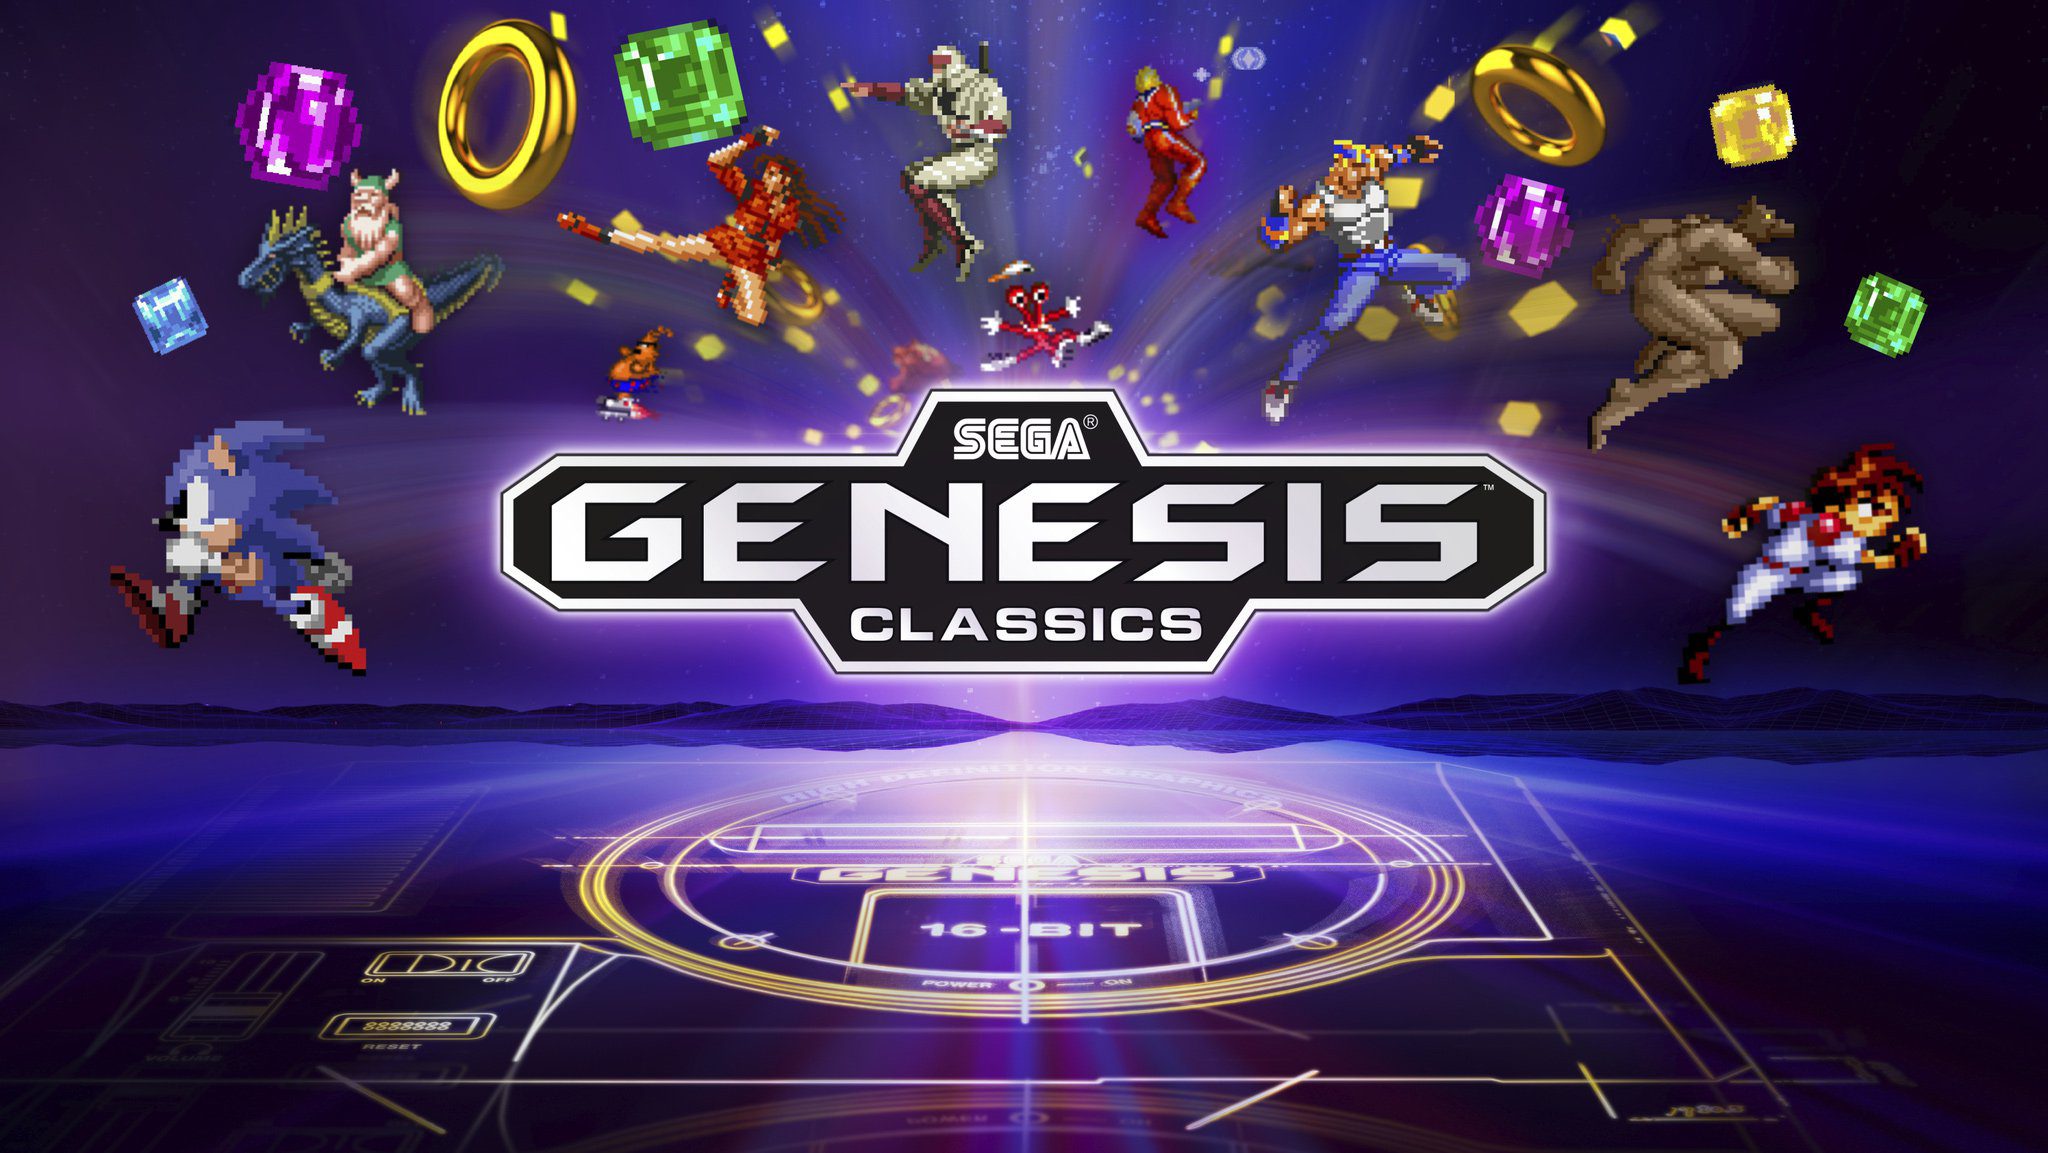 SEGA Genesis Classics available for pre-order with 10% discount